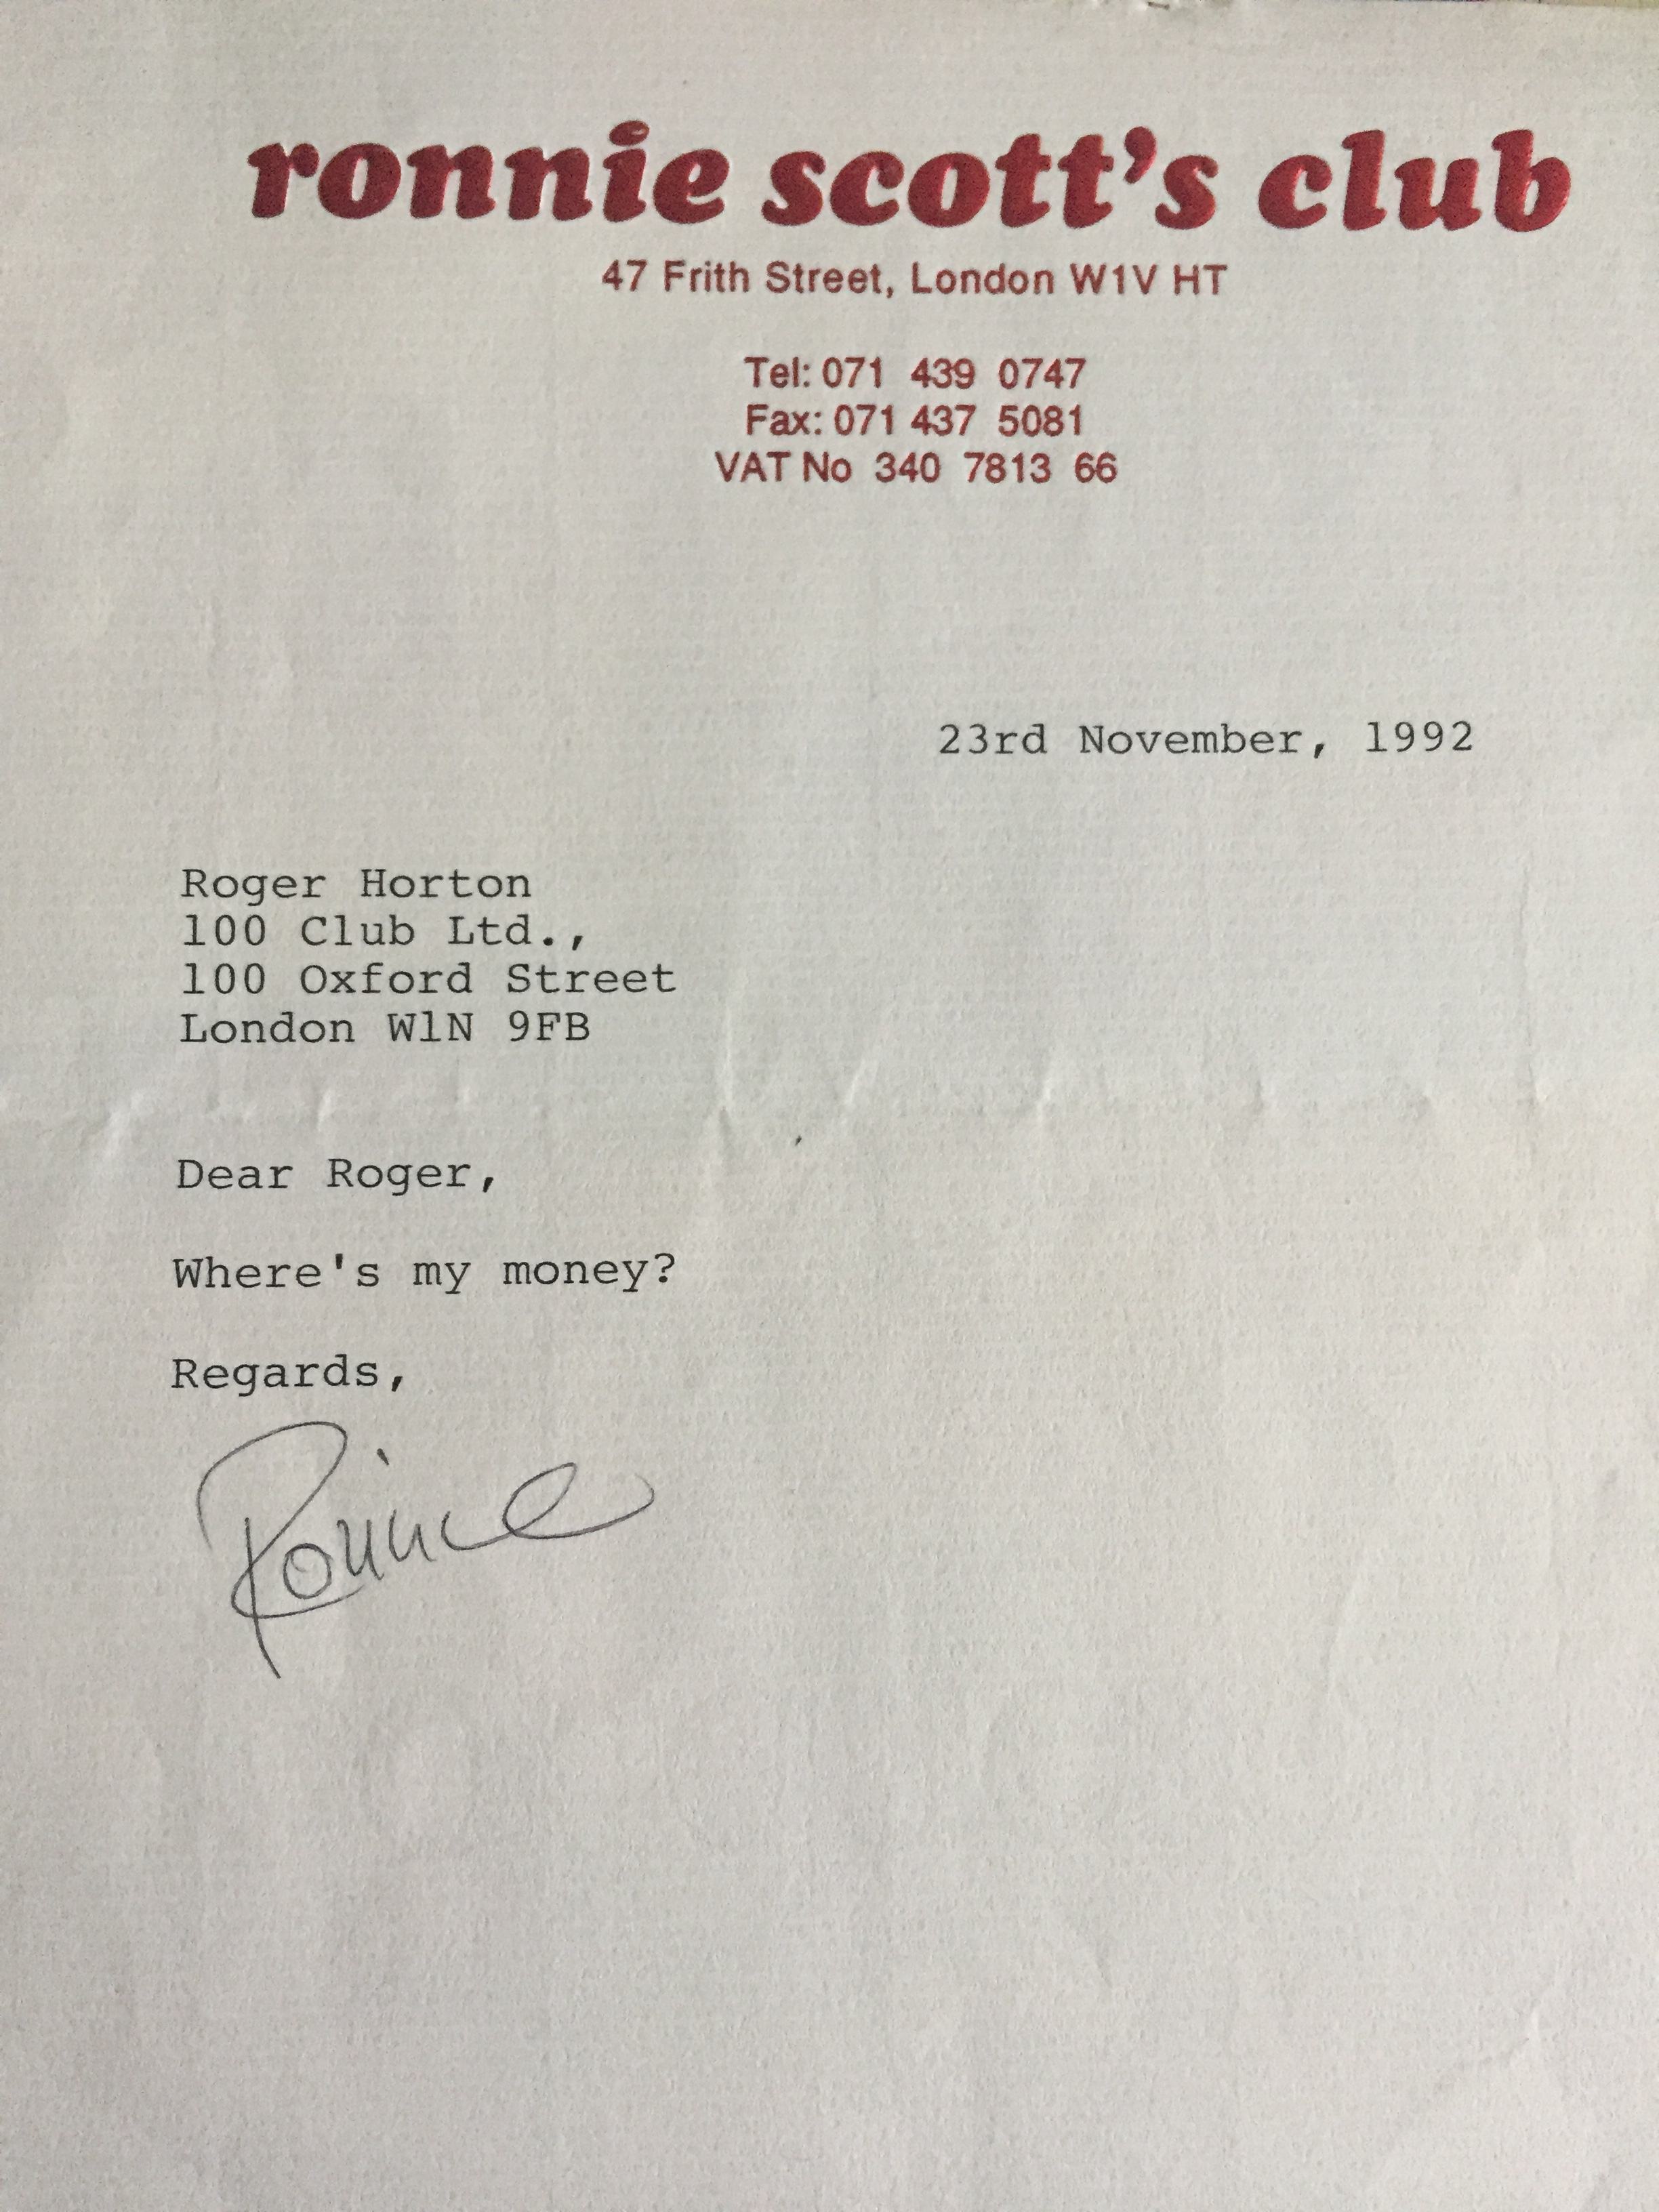 1.Letter to Roger Horton from Ronnie Scott (1992)